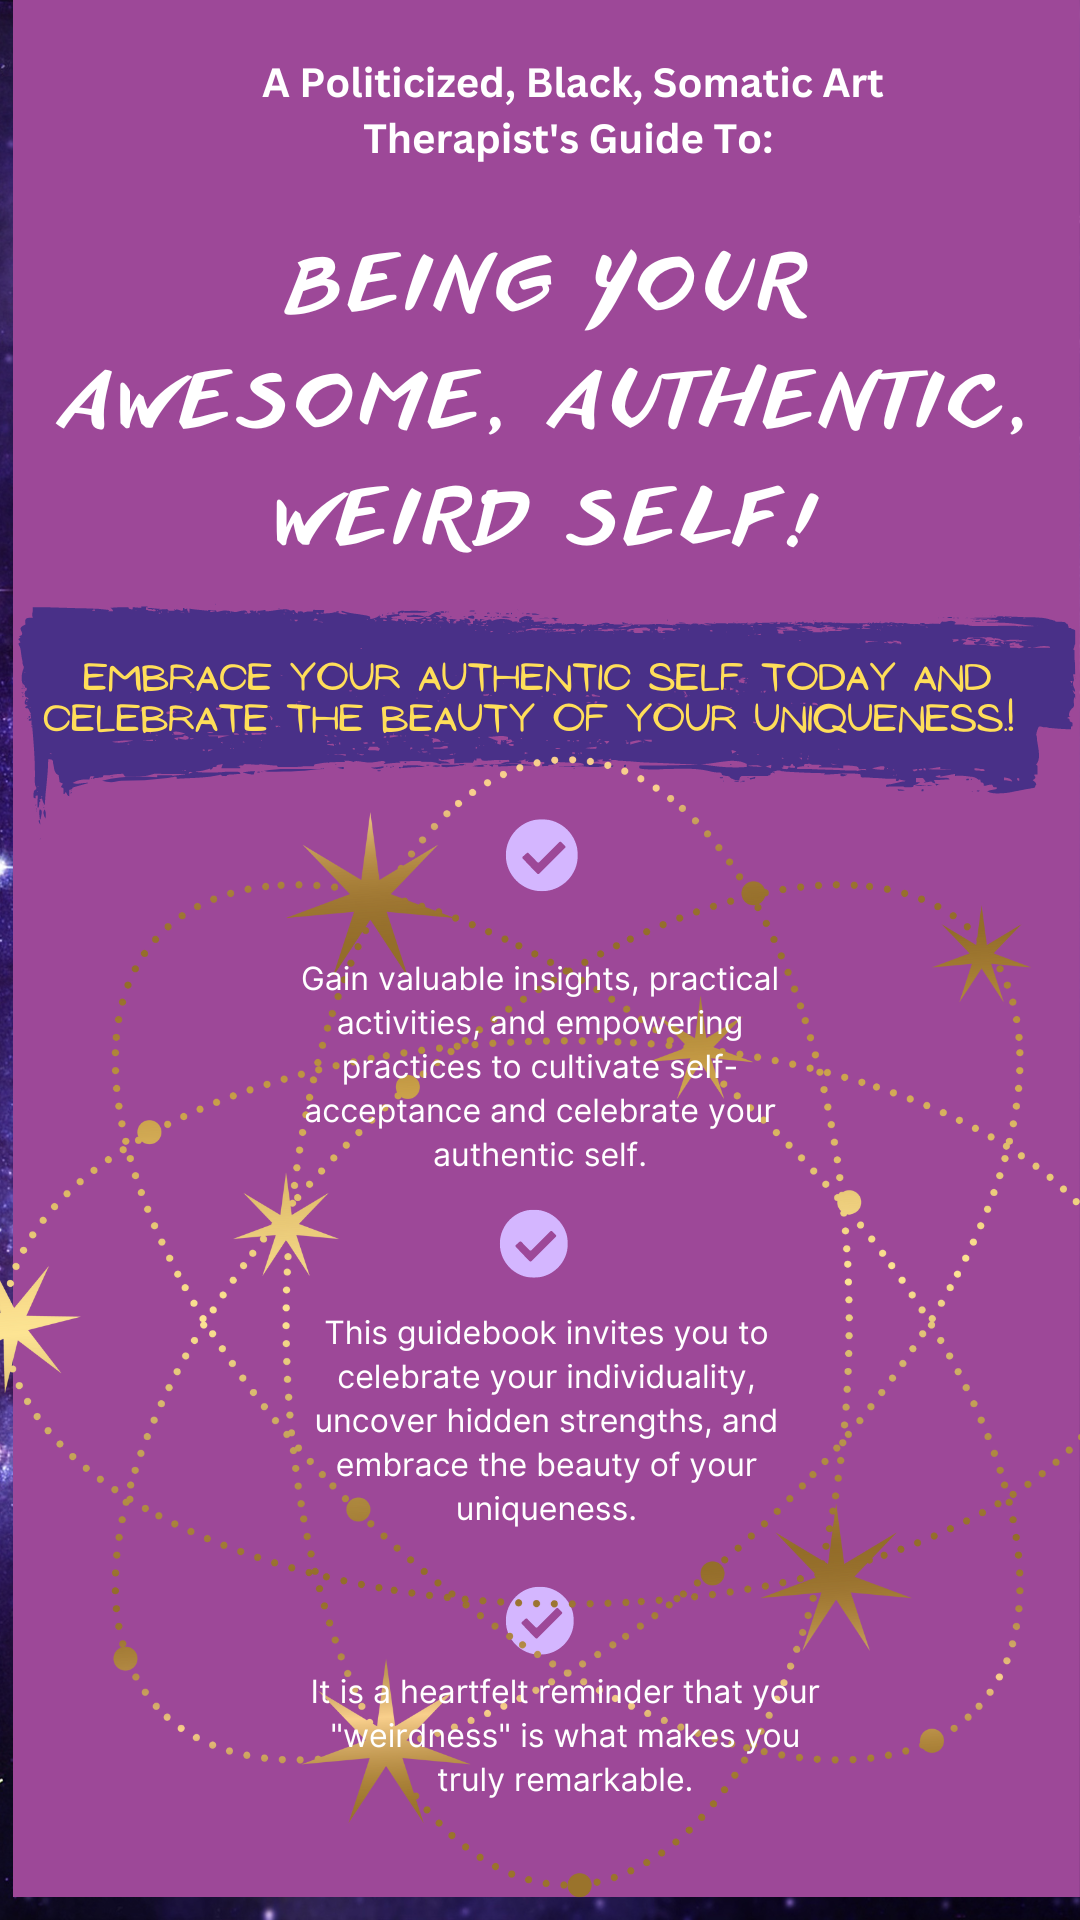 A Politicized, Black, Somatic Art Therapist's Guide To being your awesome, authentic, weird self!